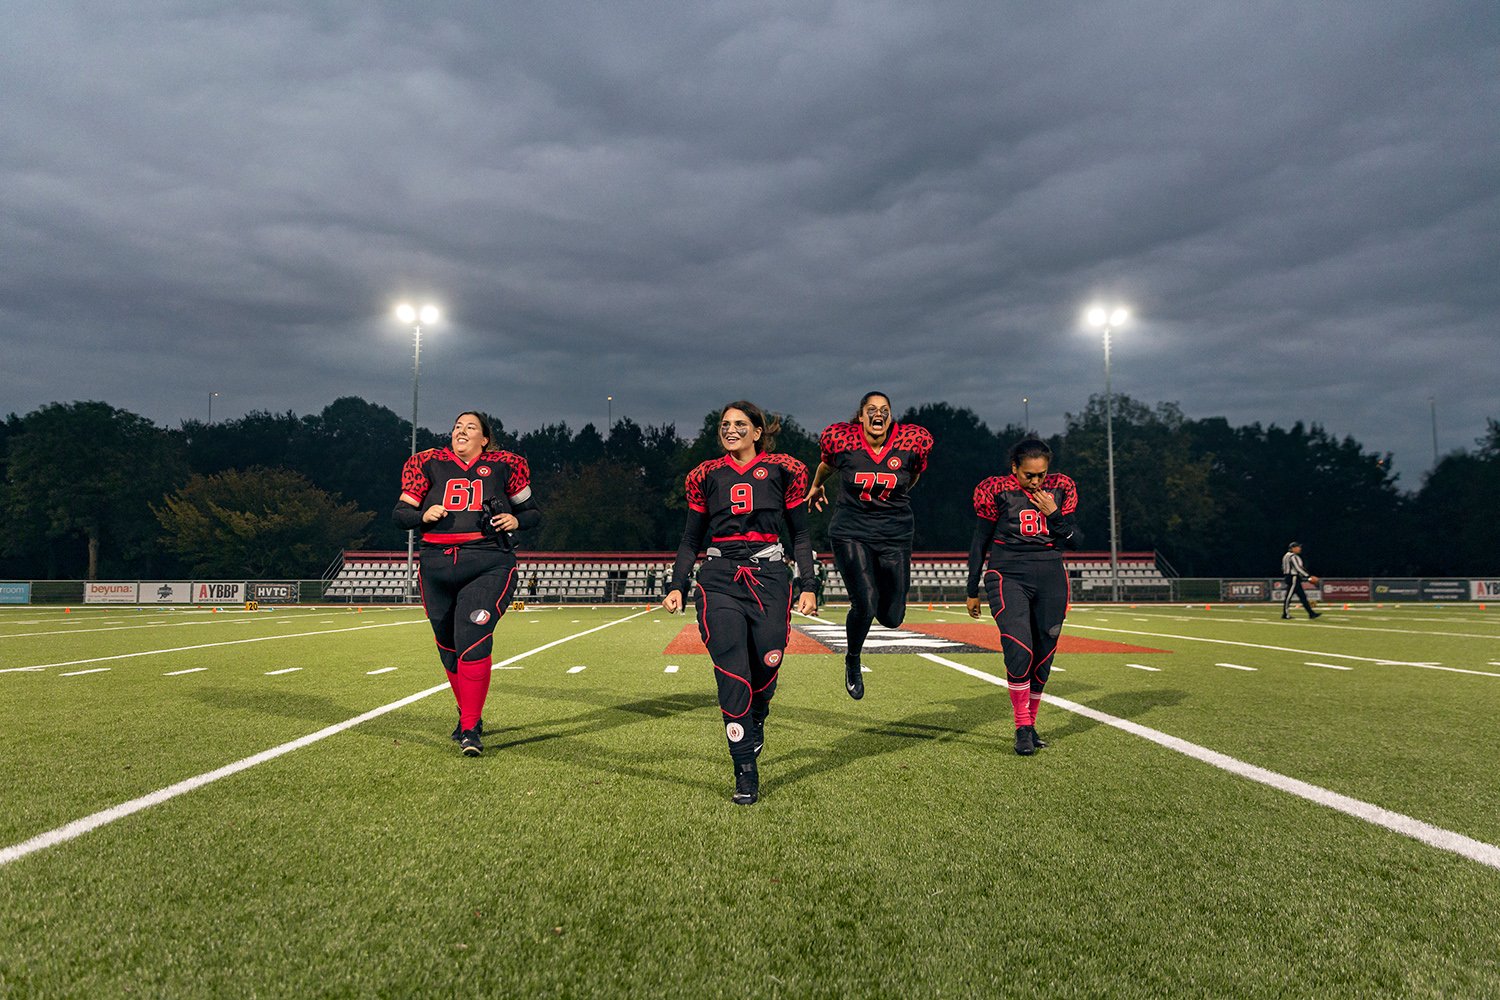  Left to right: Amsterdam Cats center Michelle, quarterback Kelly, center guard Sitara and defensive back Rufina walk back to the rest of the team after winning the coin toss before the first and only game of the 2020-2021 season against the Rotterda